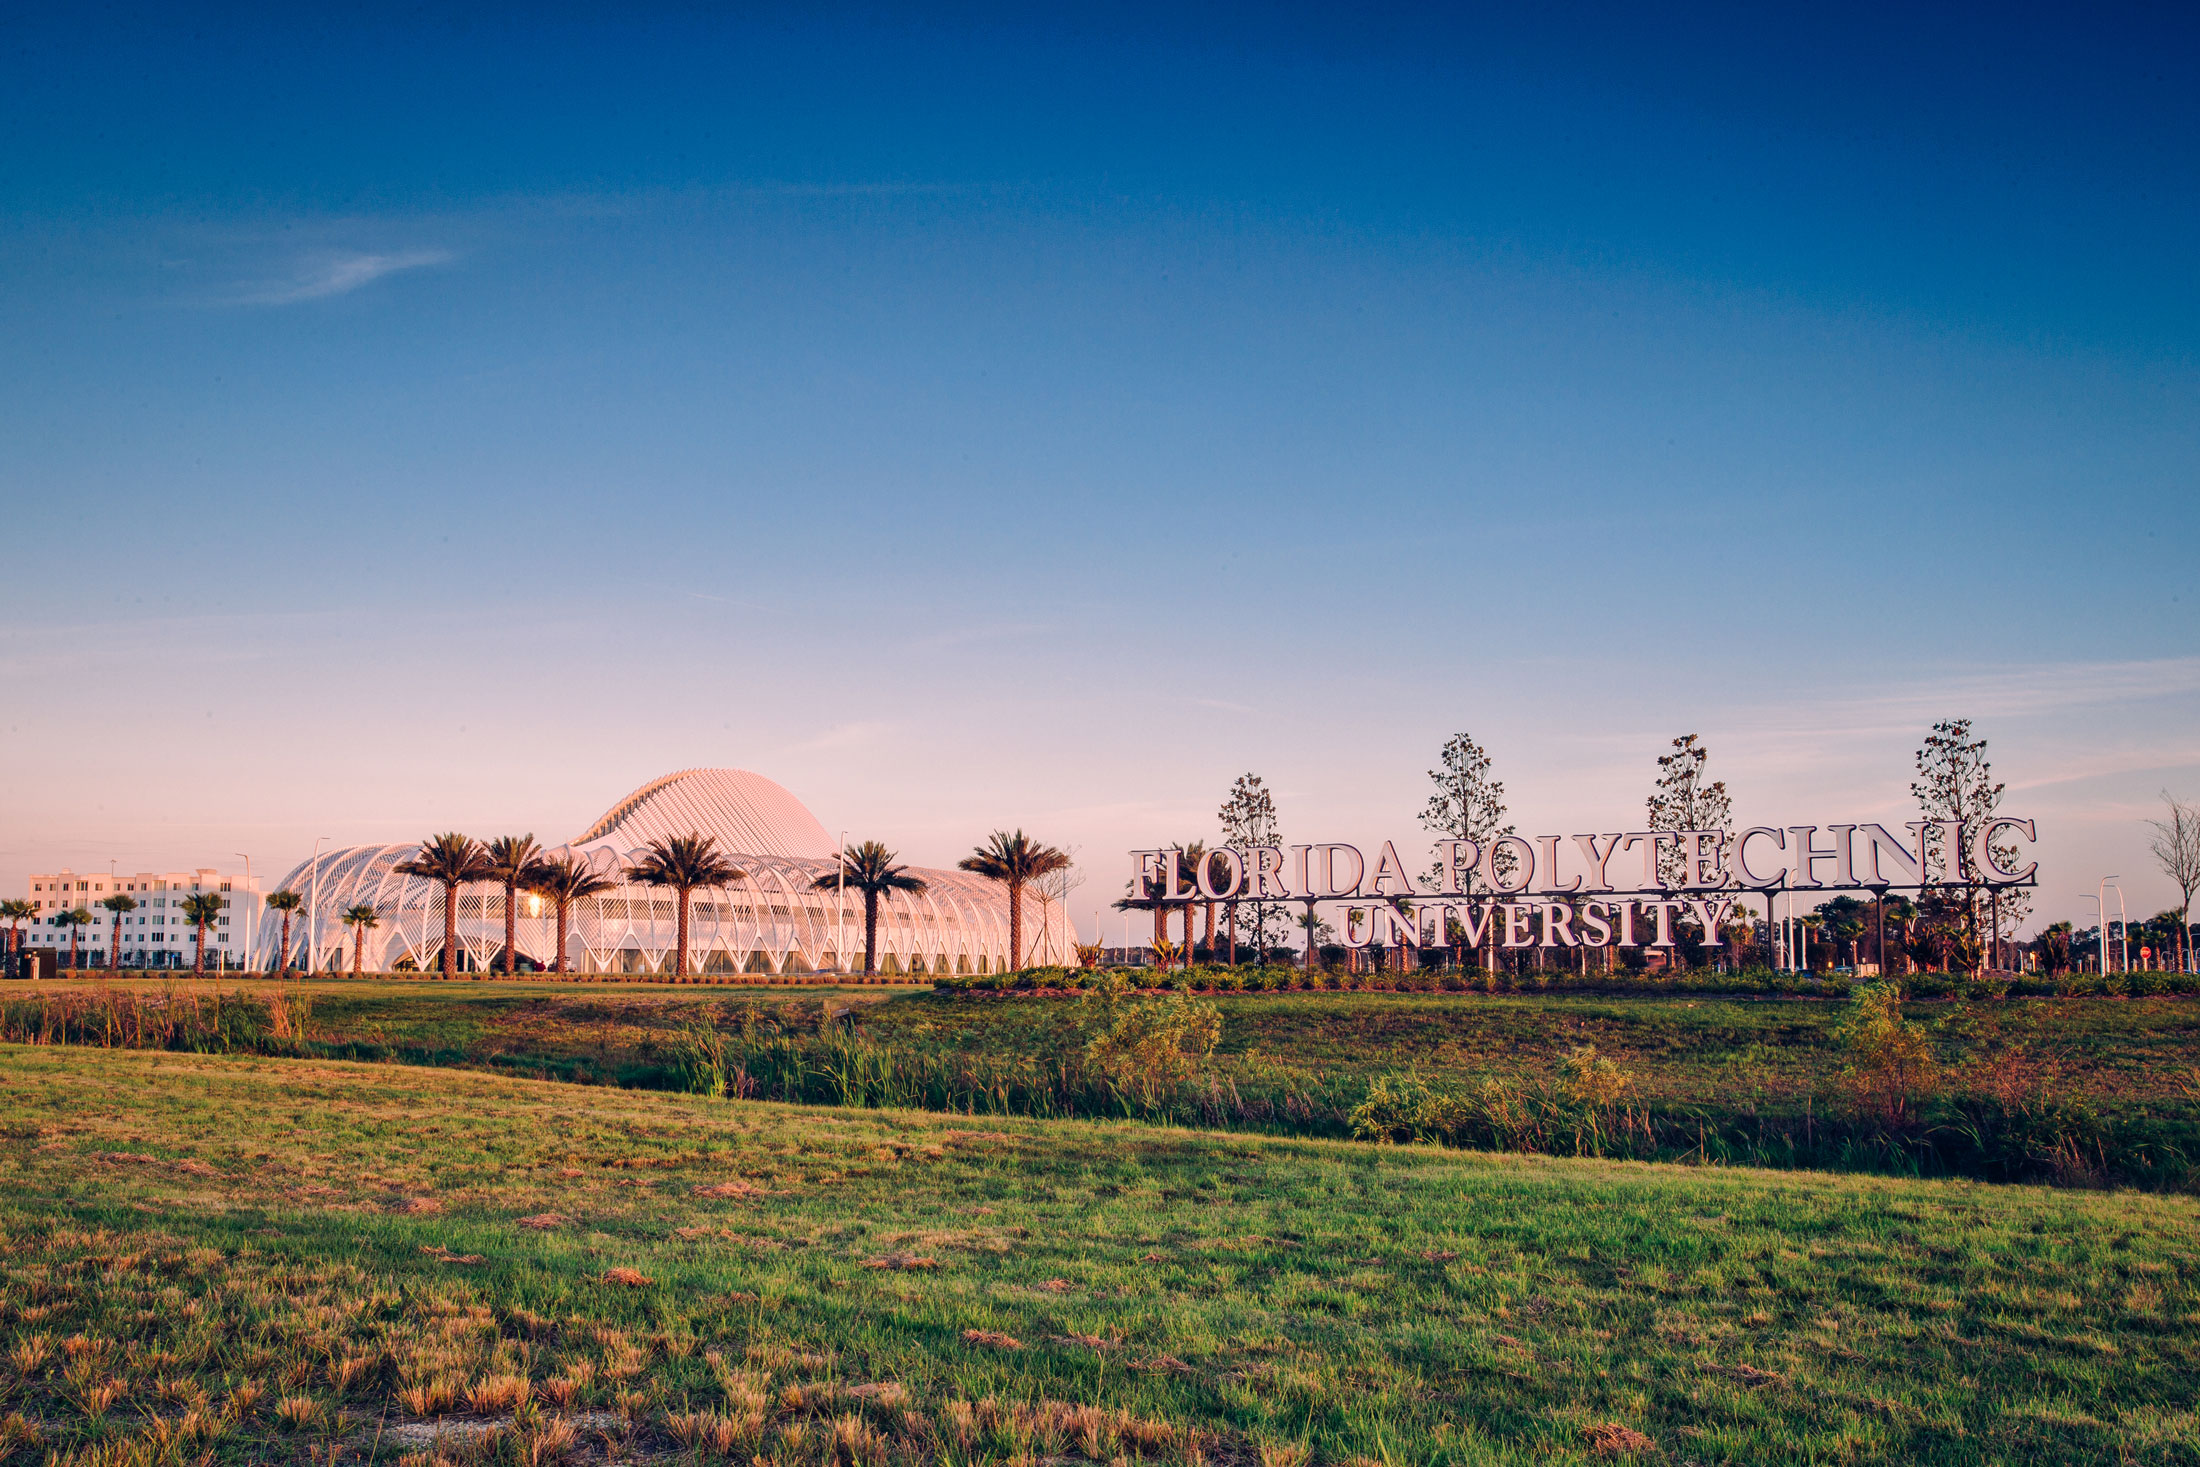 Innovation, Science, and Technology Building at Florida Polytechnic University